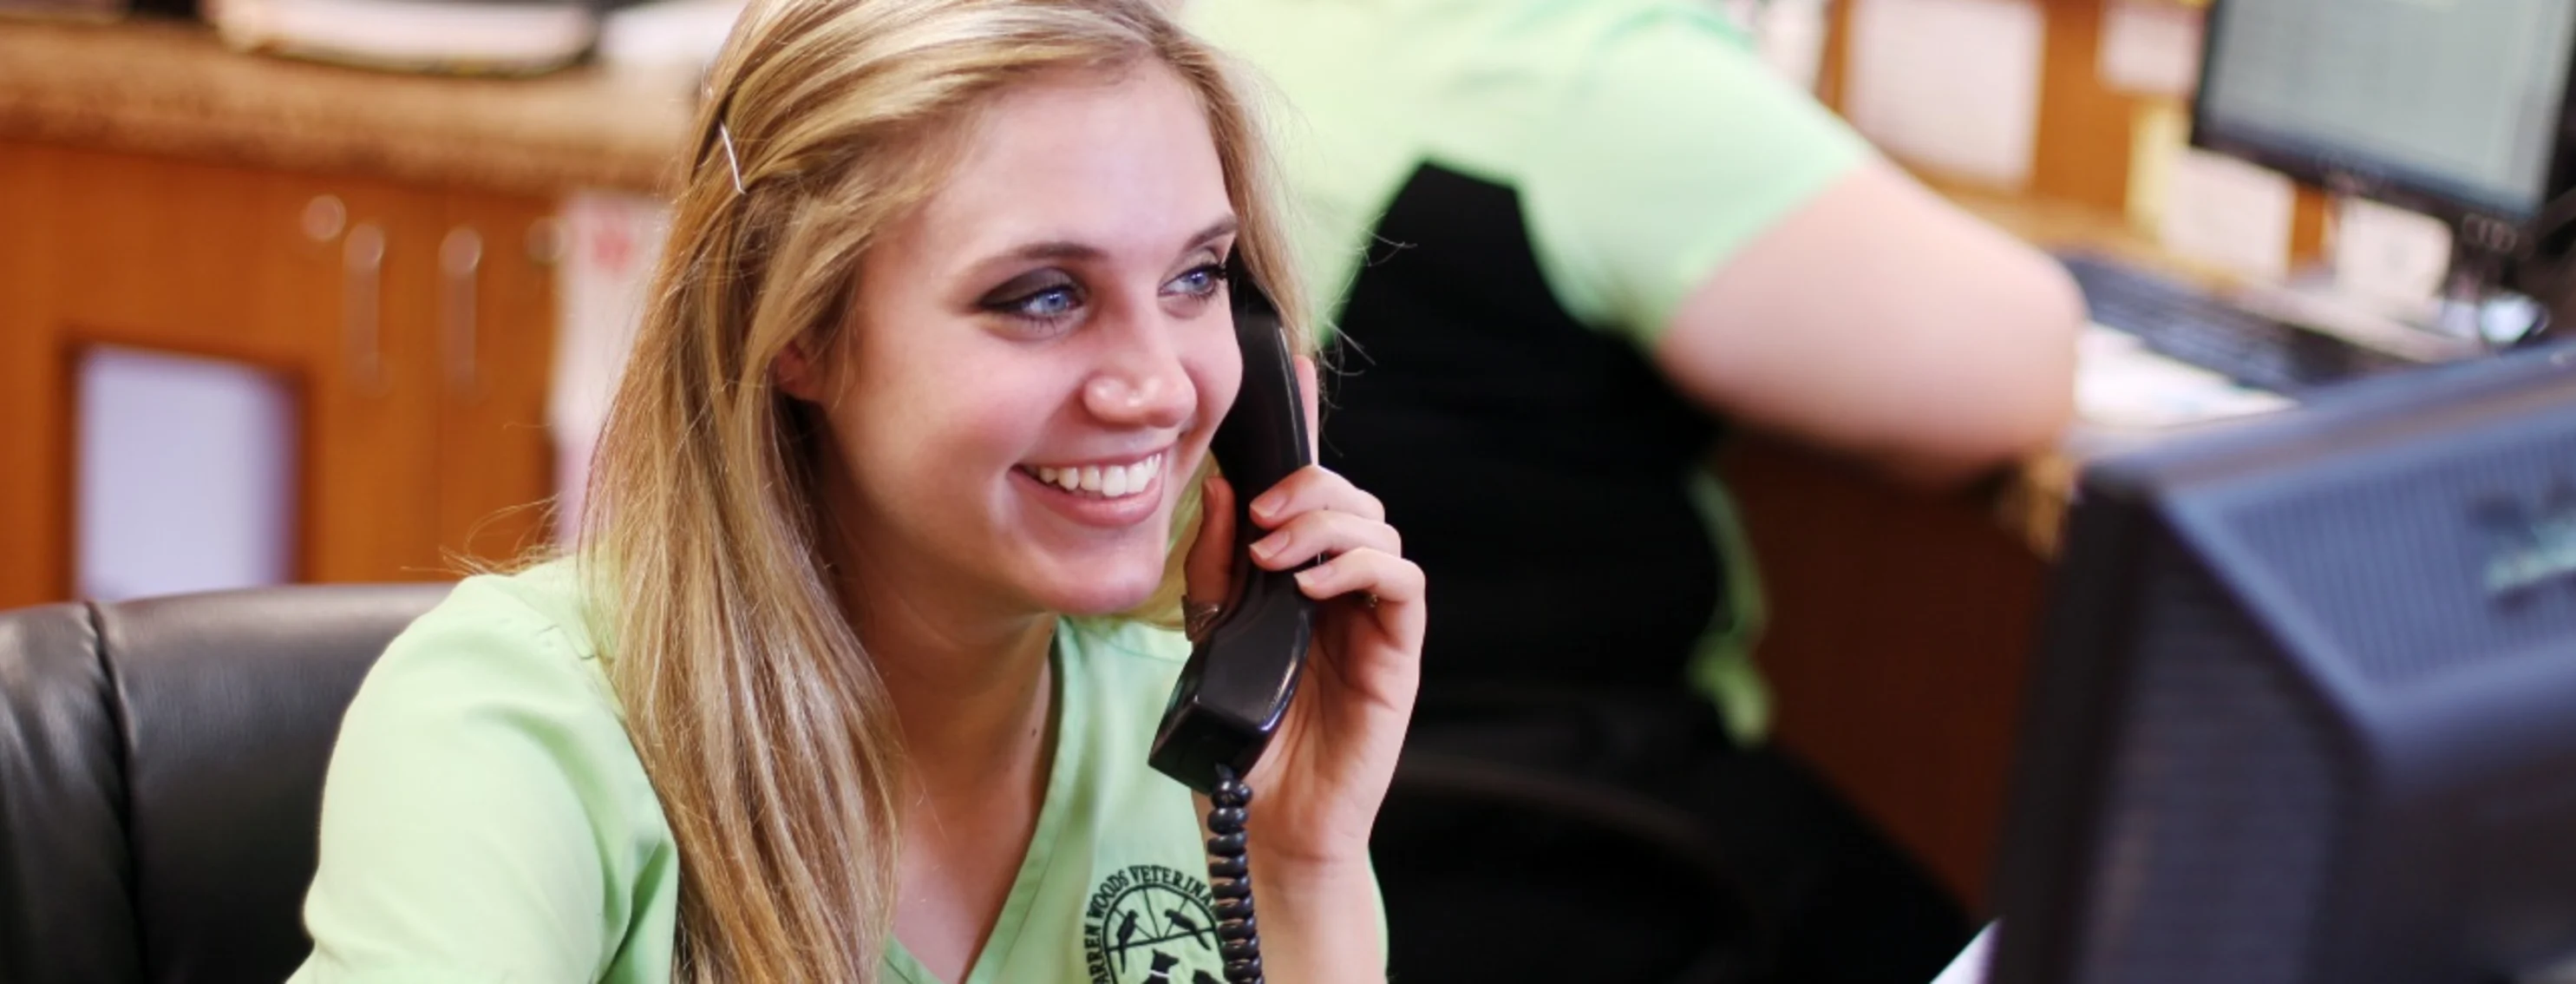 Blonde employee in green shirt smiling while on the phone